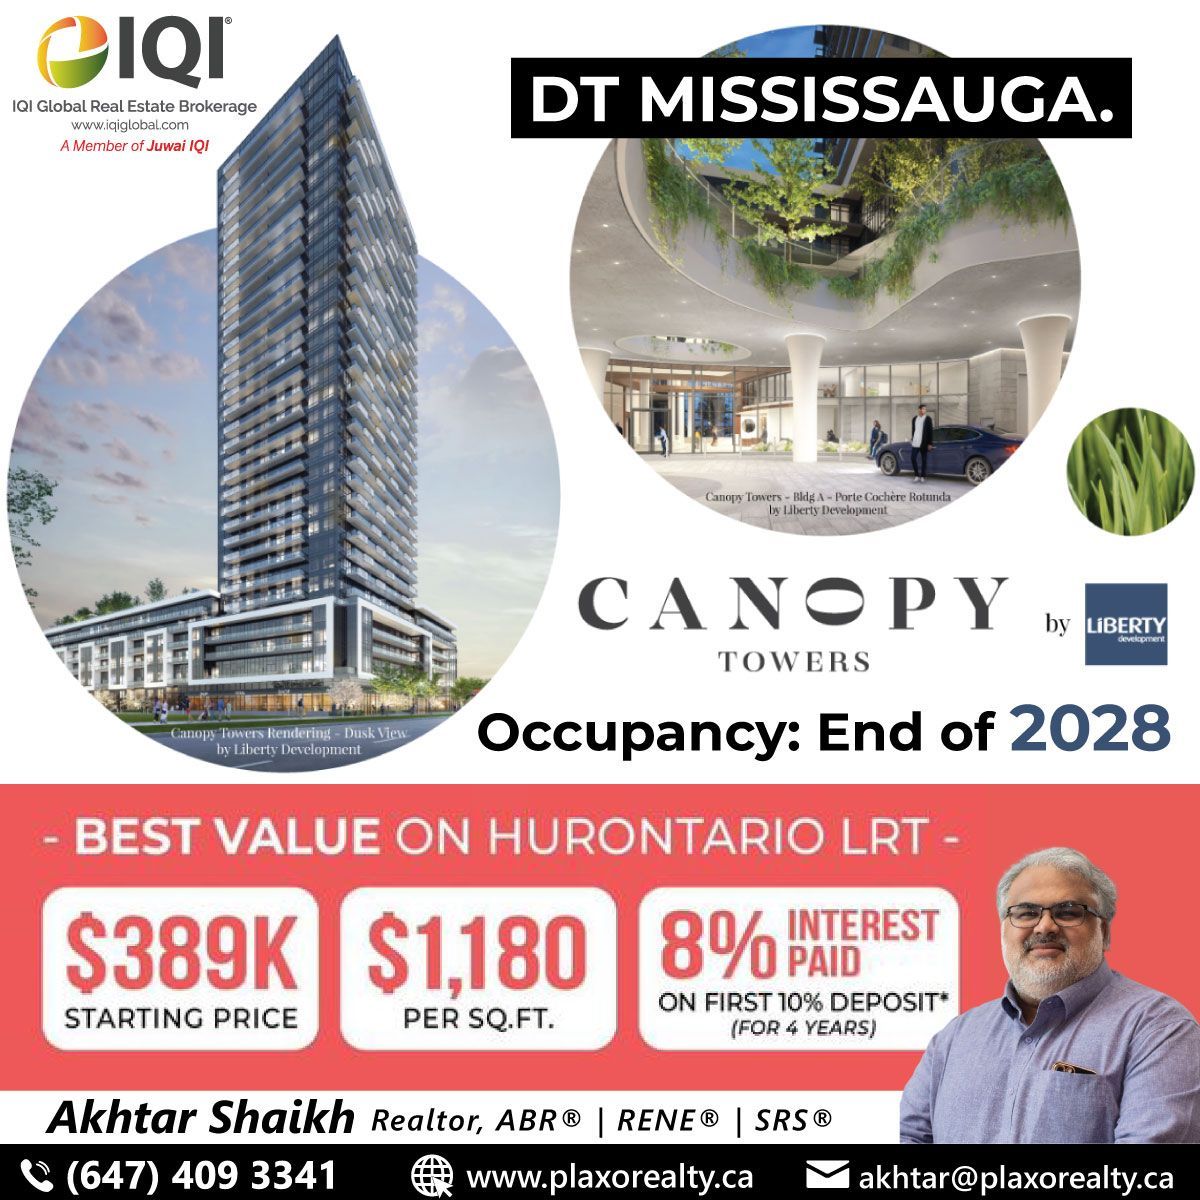 🔥CANOPY TOWERS 2🔥 in DT Mississauga! 
From $389K! Best Value along Ontario LRT with $1180 per sq.ft.
.
 #akhtariqi #akhtarshaikh #FTHS #FTHB #gtarealestate #torontorealestate #gtacondos #mississaugacondos #mississaugarealestate #canopy2 #canopytowers #canopytowers2